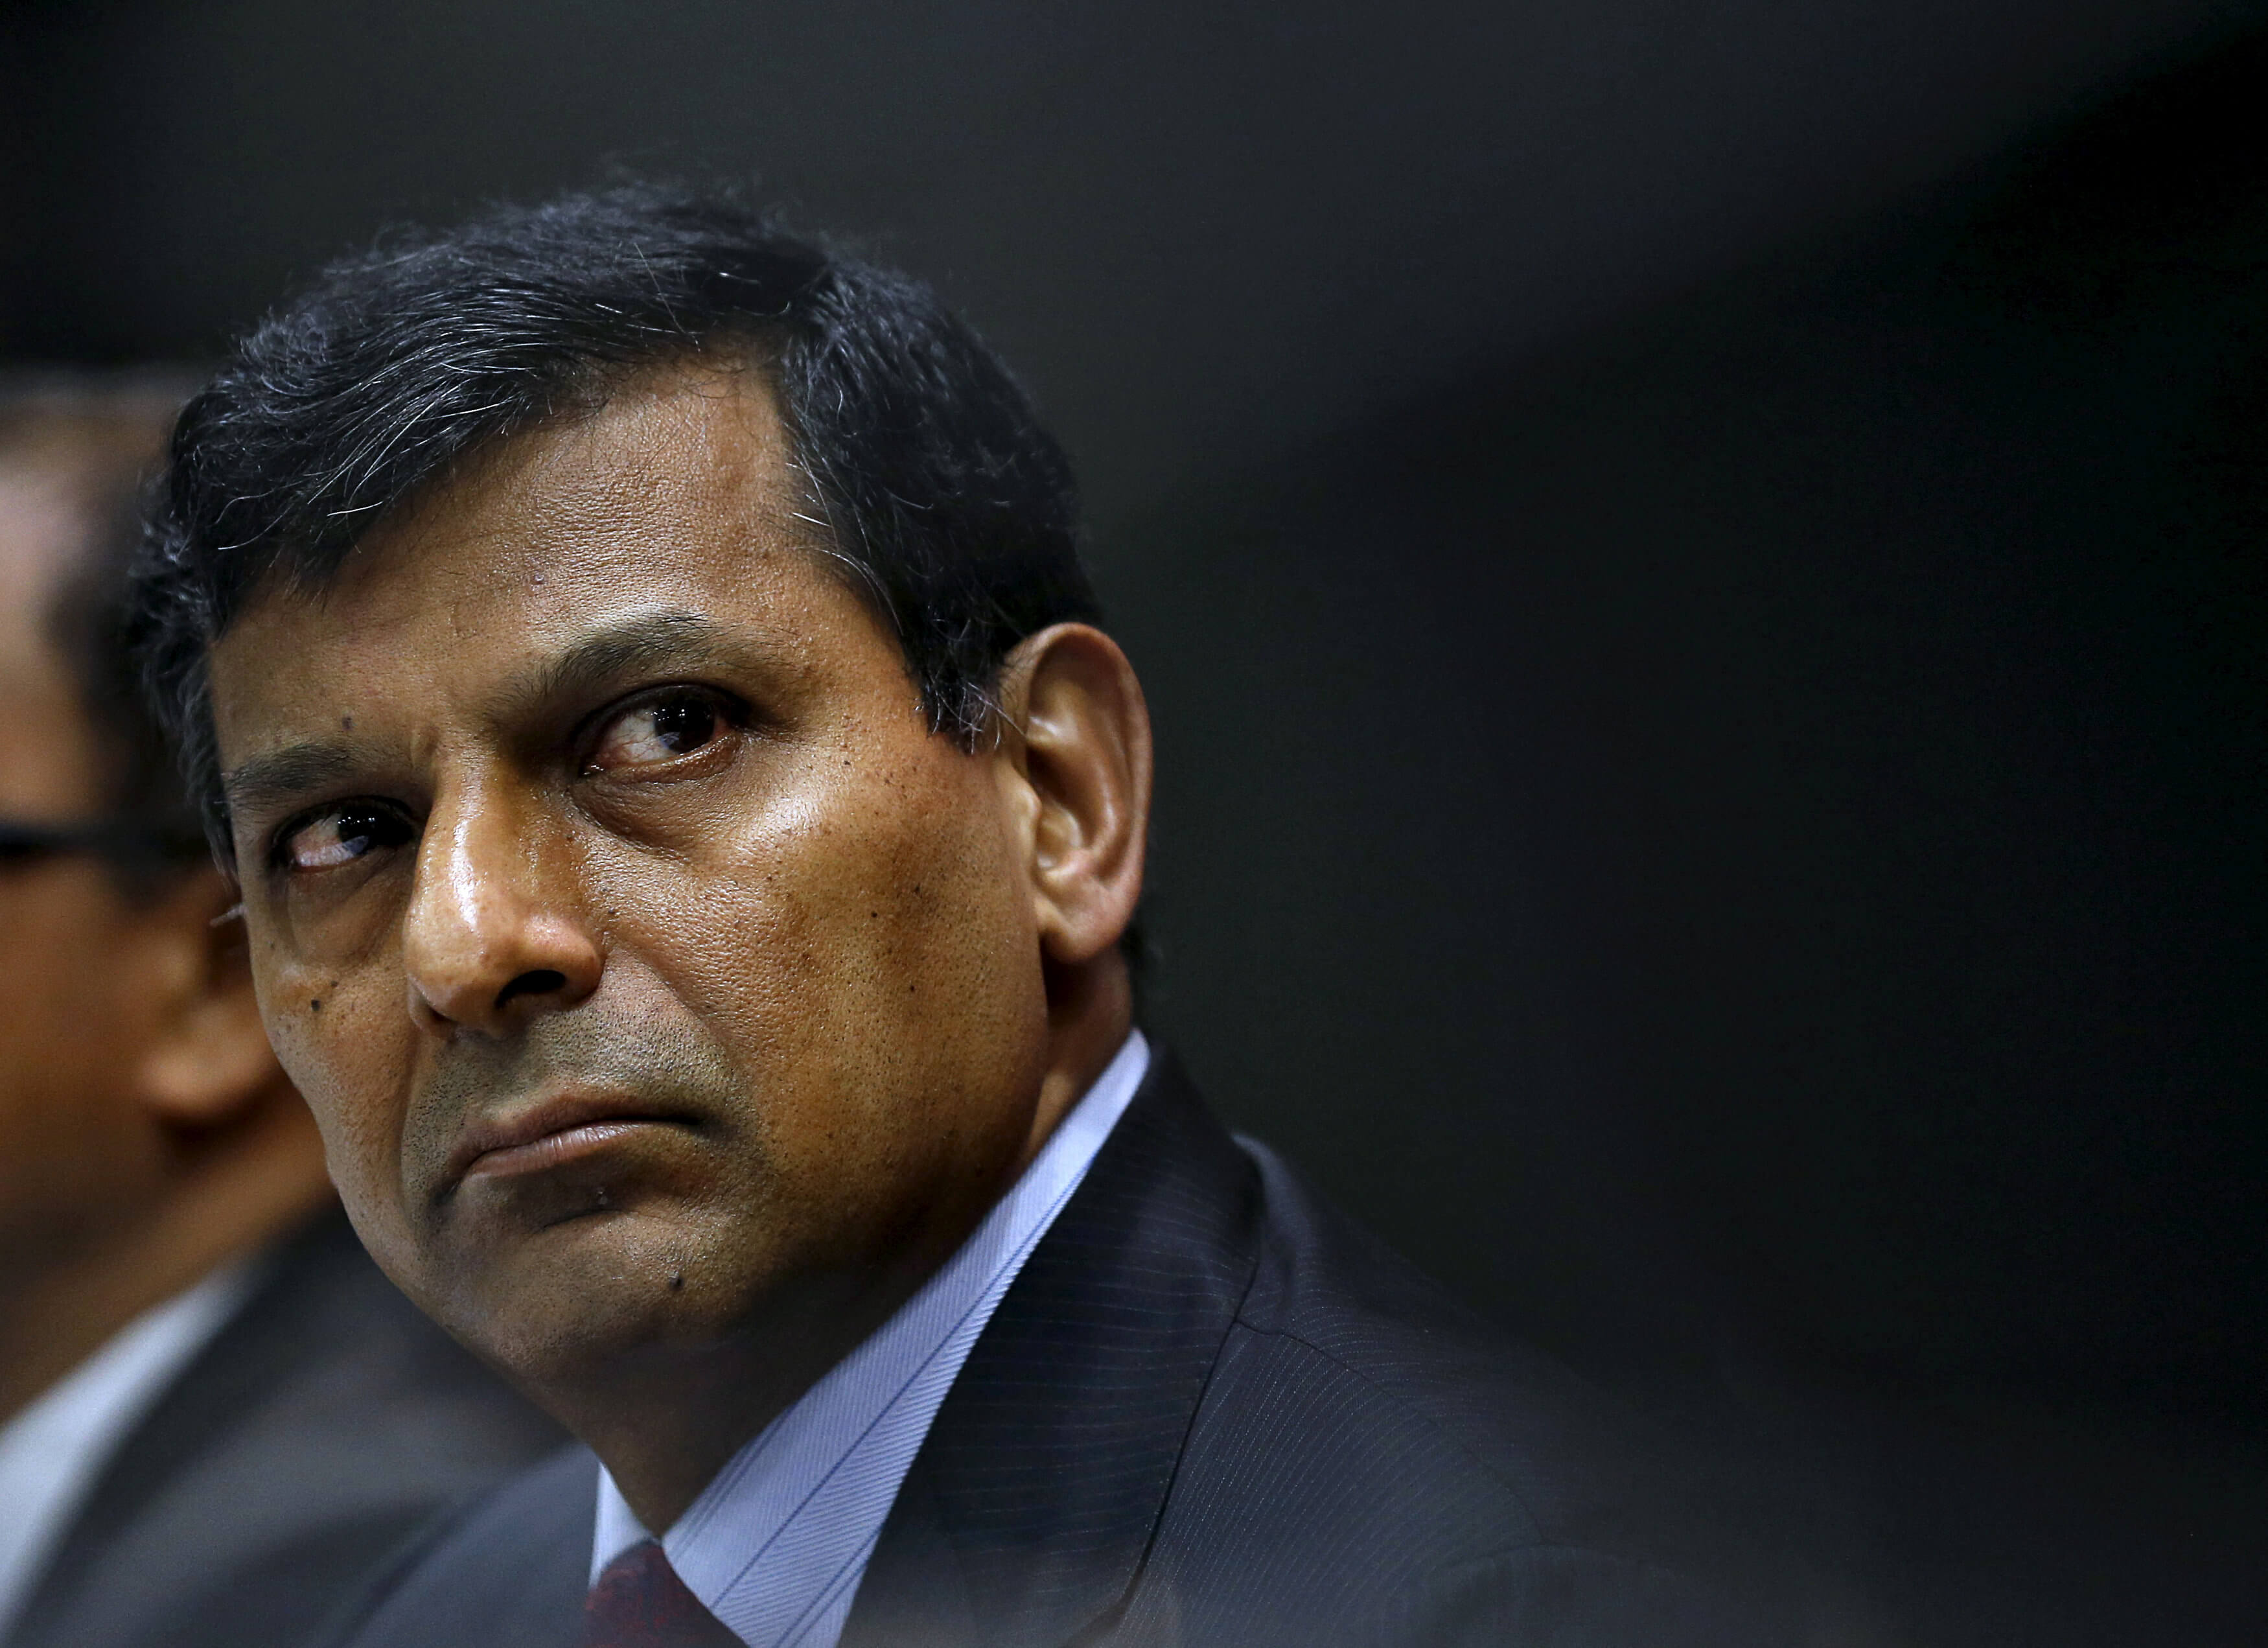 Reserve Bank of India (RBI) Governor Raghuram Rajan attends a news conference after their bimonthly monetary policy review in Mumbai, India, April 5, 2016. REUTERS/Danish Siddiqui/File Photo